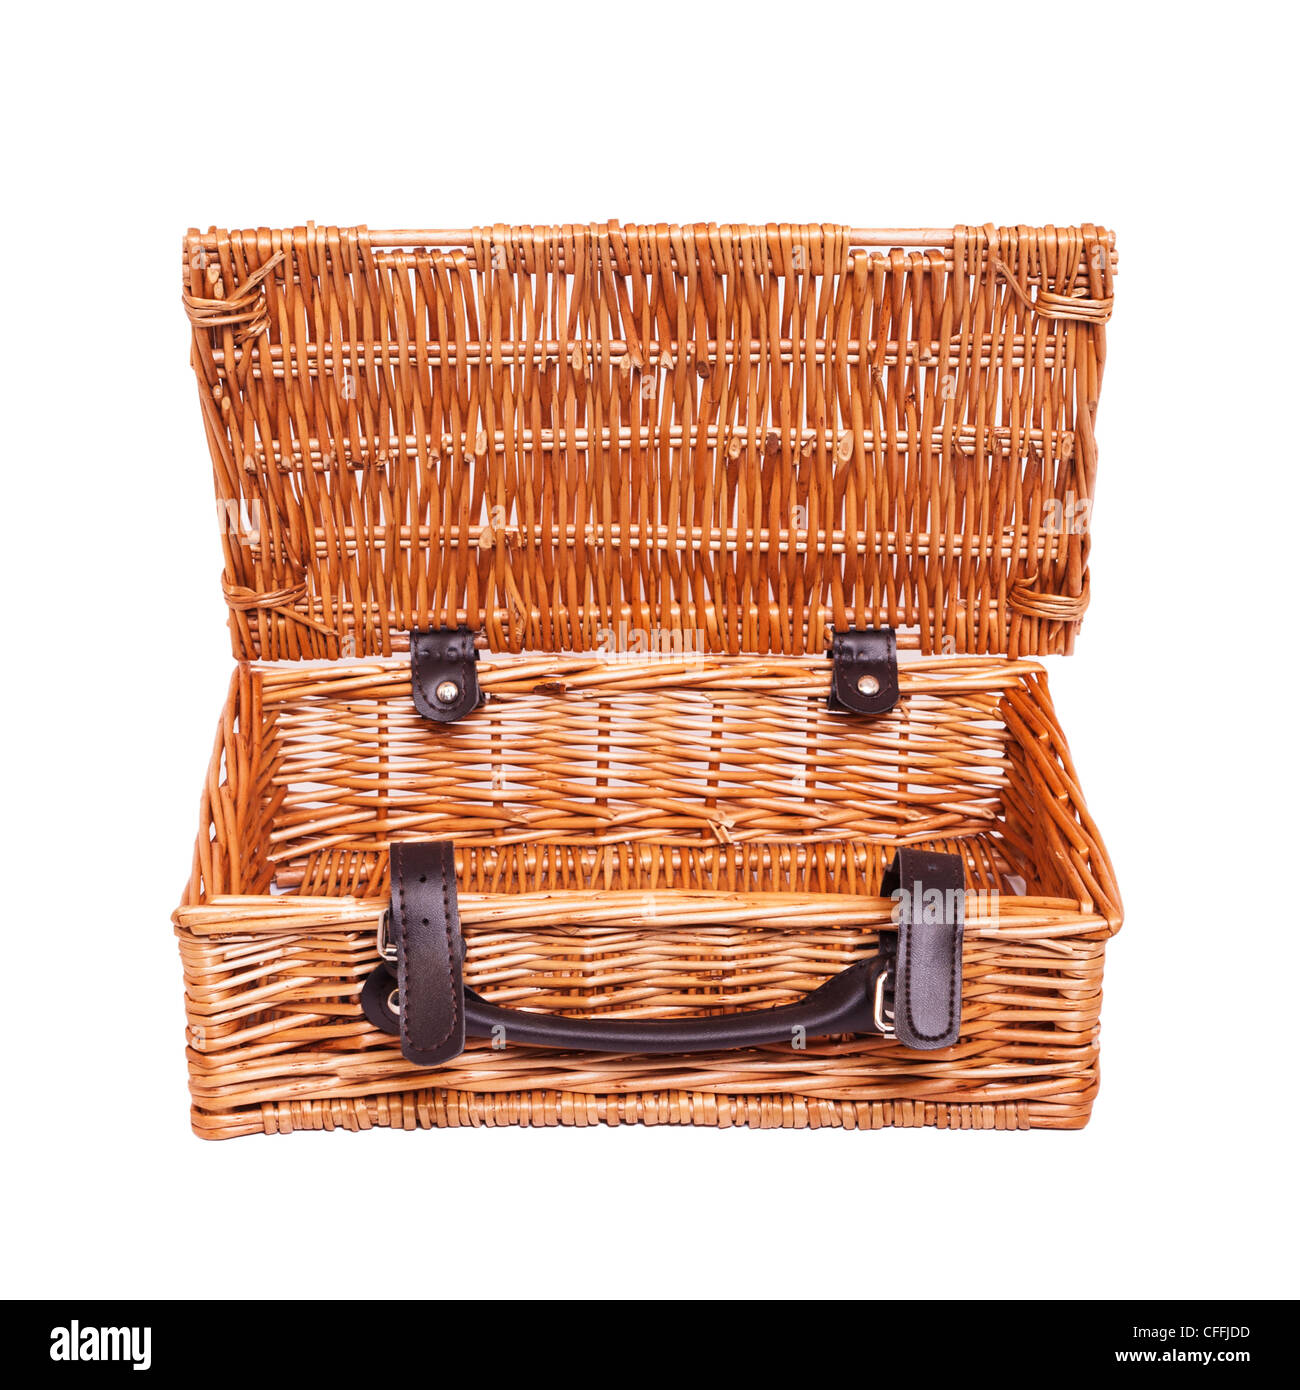 A small traditional wicker picnic basket on a white background Stock Photo